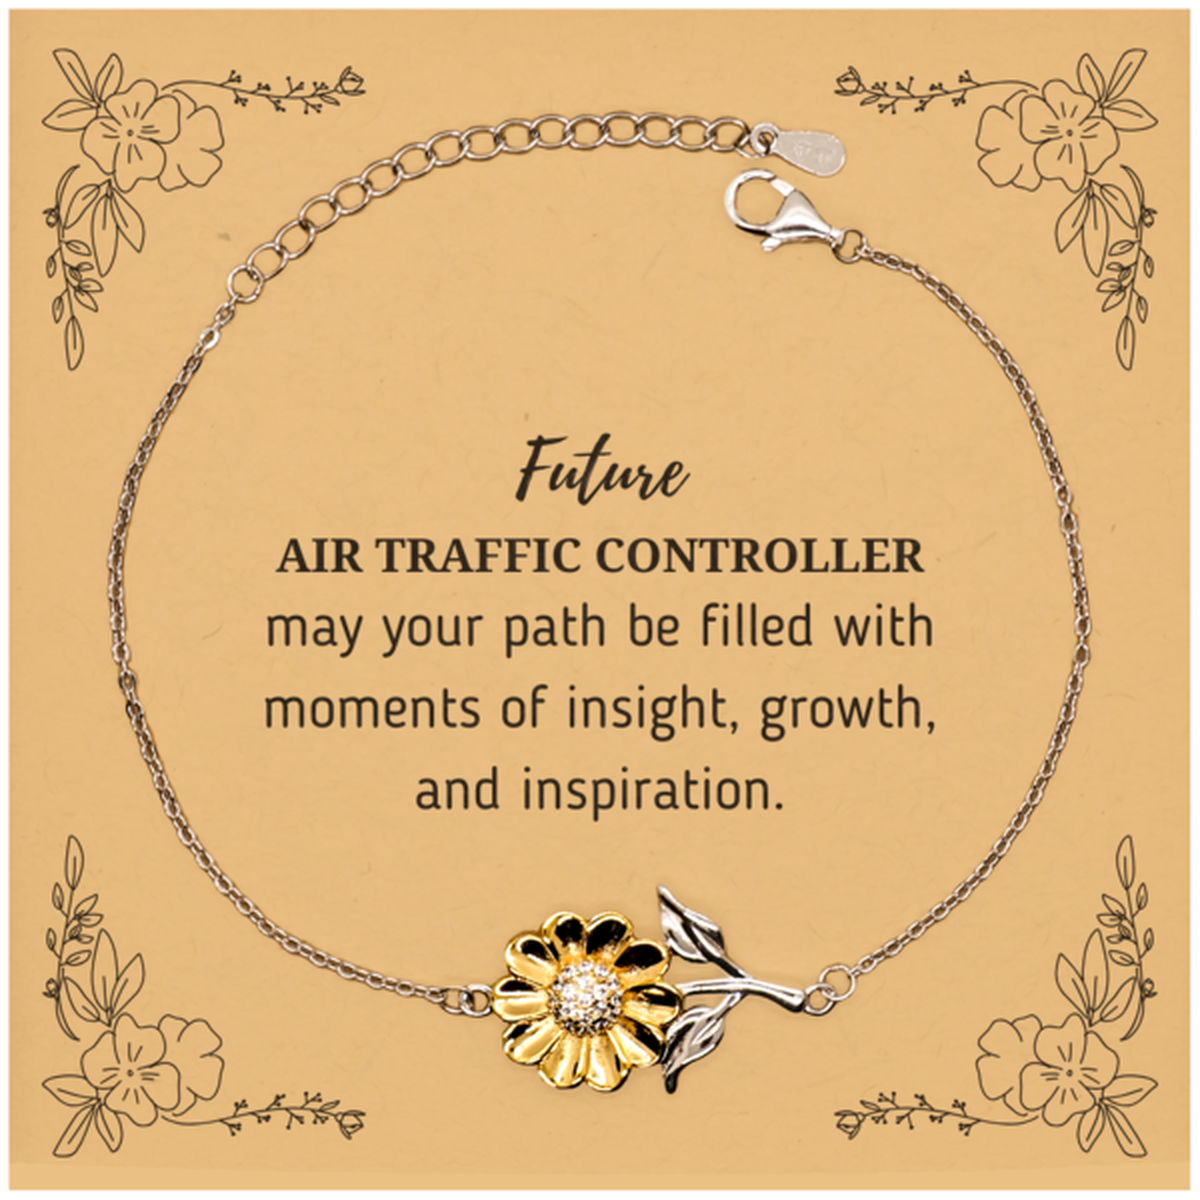 Future Air Traffic Controller Gifts, May your path be filled with moments of insight, Graduation Gifts for New Air Traffic Controller, Christmas Unique Sunflower Bracelet For Men, Women, Friends